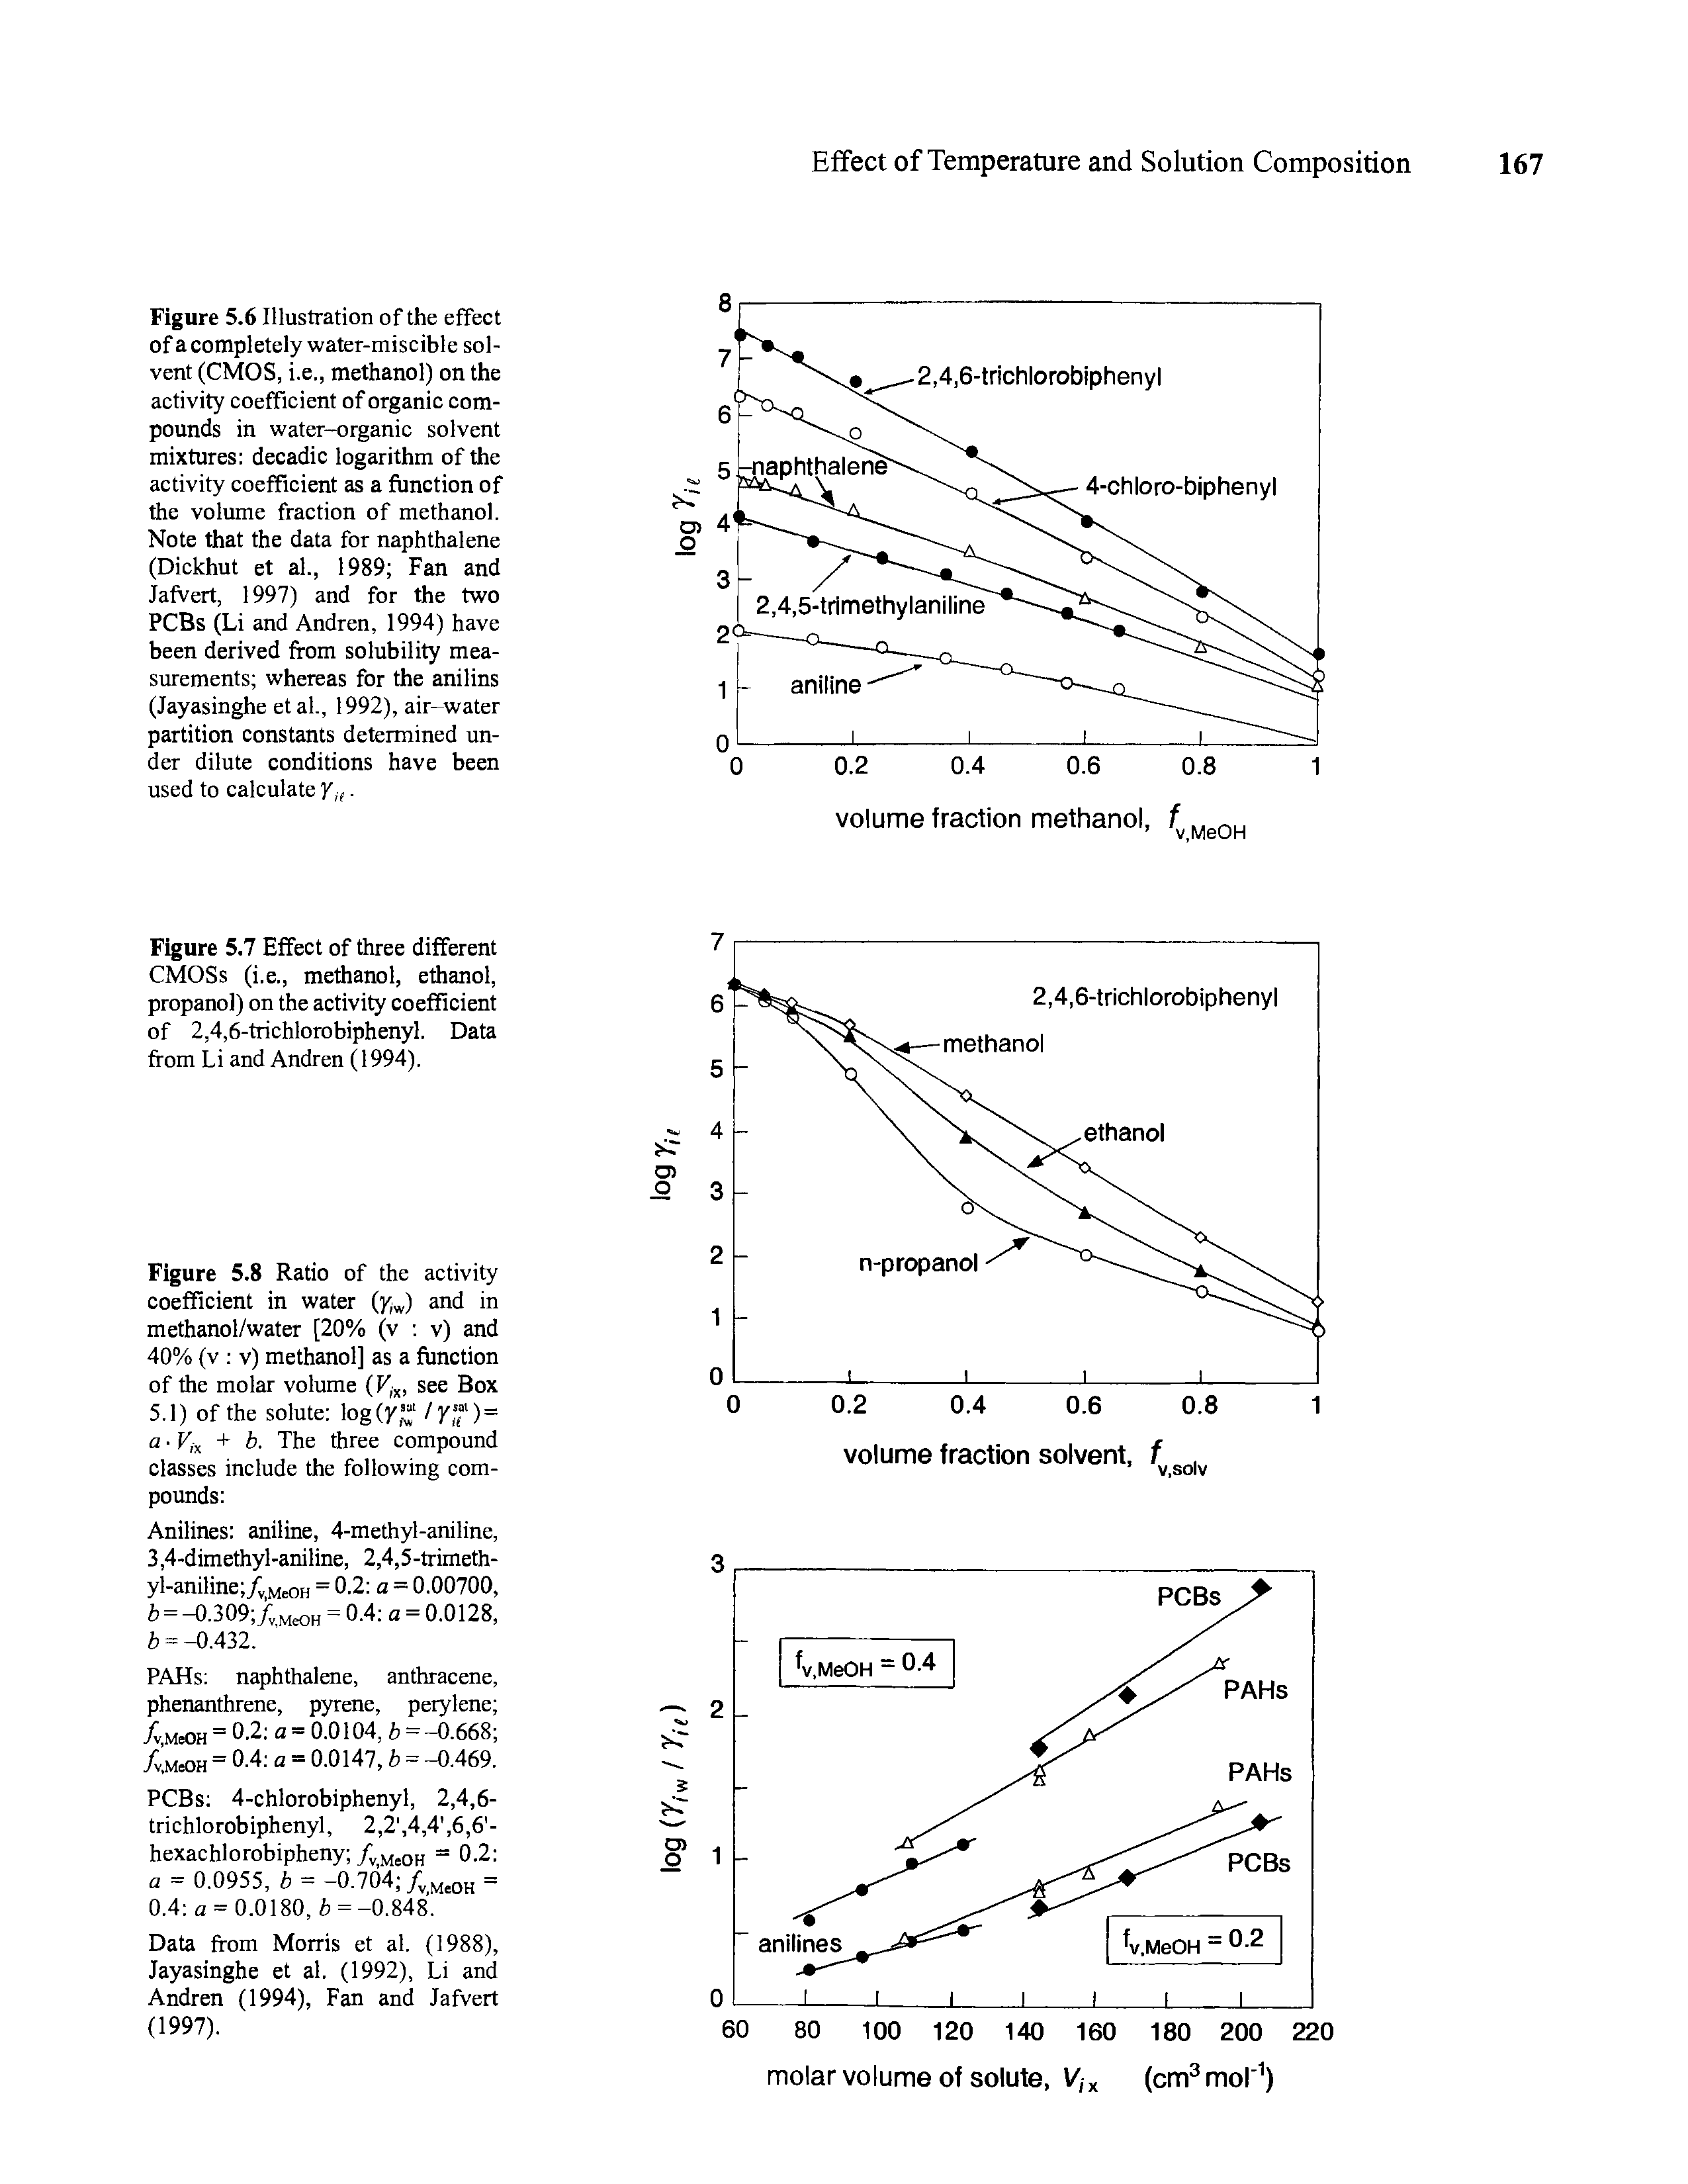 Figure 5.6 Illustration of the effect of a completely water-miscible solvent (CMOS, i.e., methanol) on the activity coefficient of organic compounds in water-organic solvent mixtures decadic logarithm of the activity coefficient as a function of the volume fraction of methanol. Note that the data for naphthalene (Dickhut et al., 1989 Fan and Jafvert, 1997) and for the two PCBs (Li and Andren, 1994) have been derived from solubility measurements whereas for the anilins (Jayasinghe etal., 1992), air-water partition constants determined under dilute conditions have been used to calculate y,f.